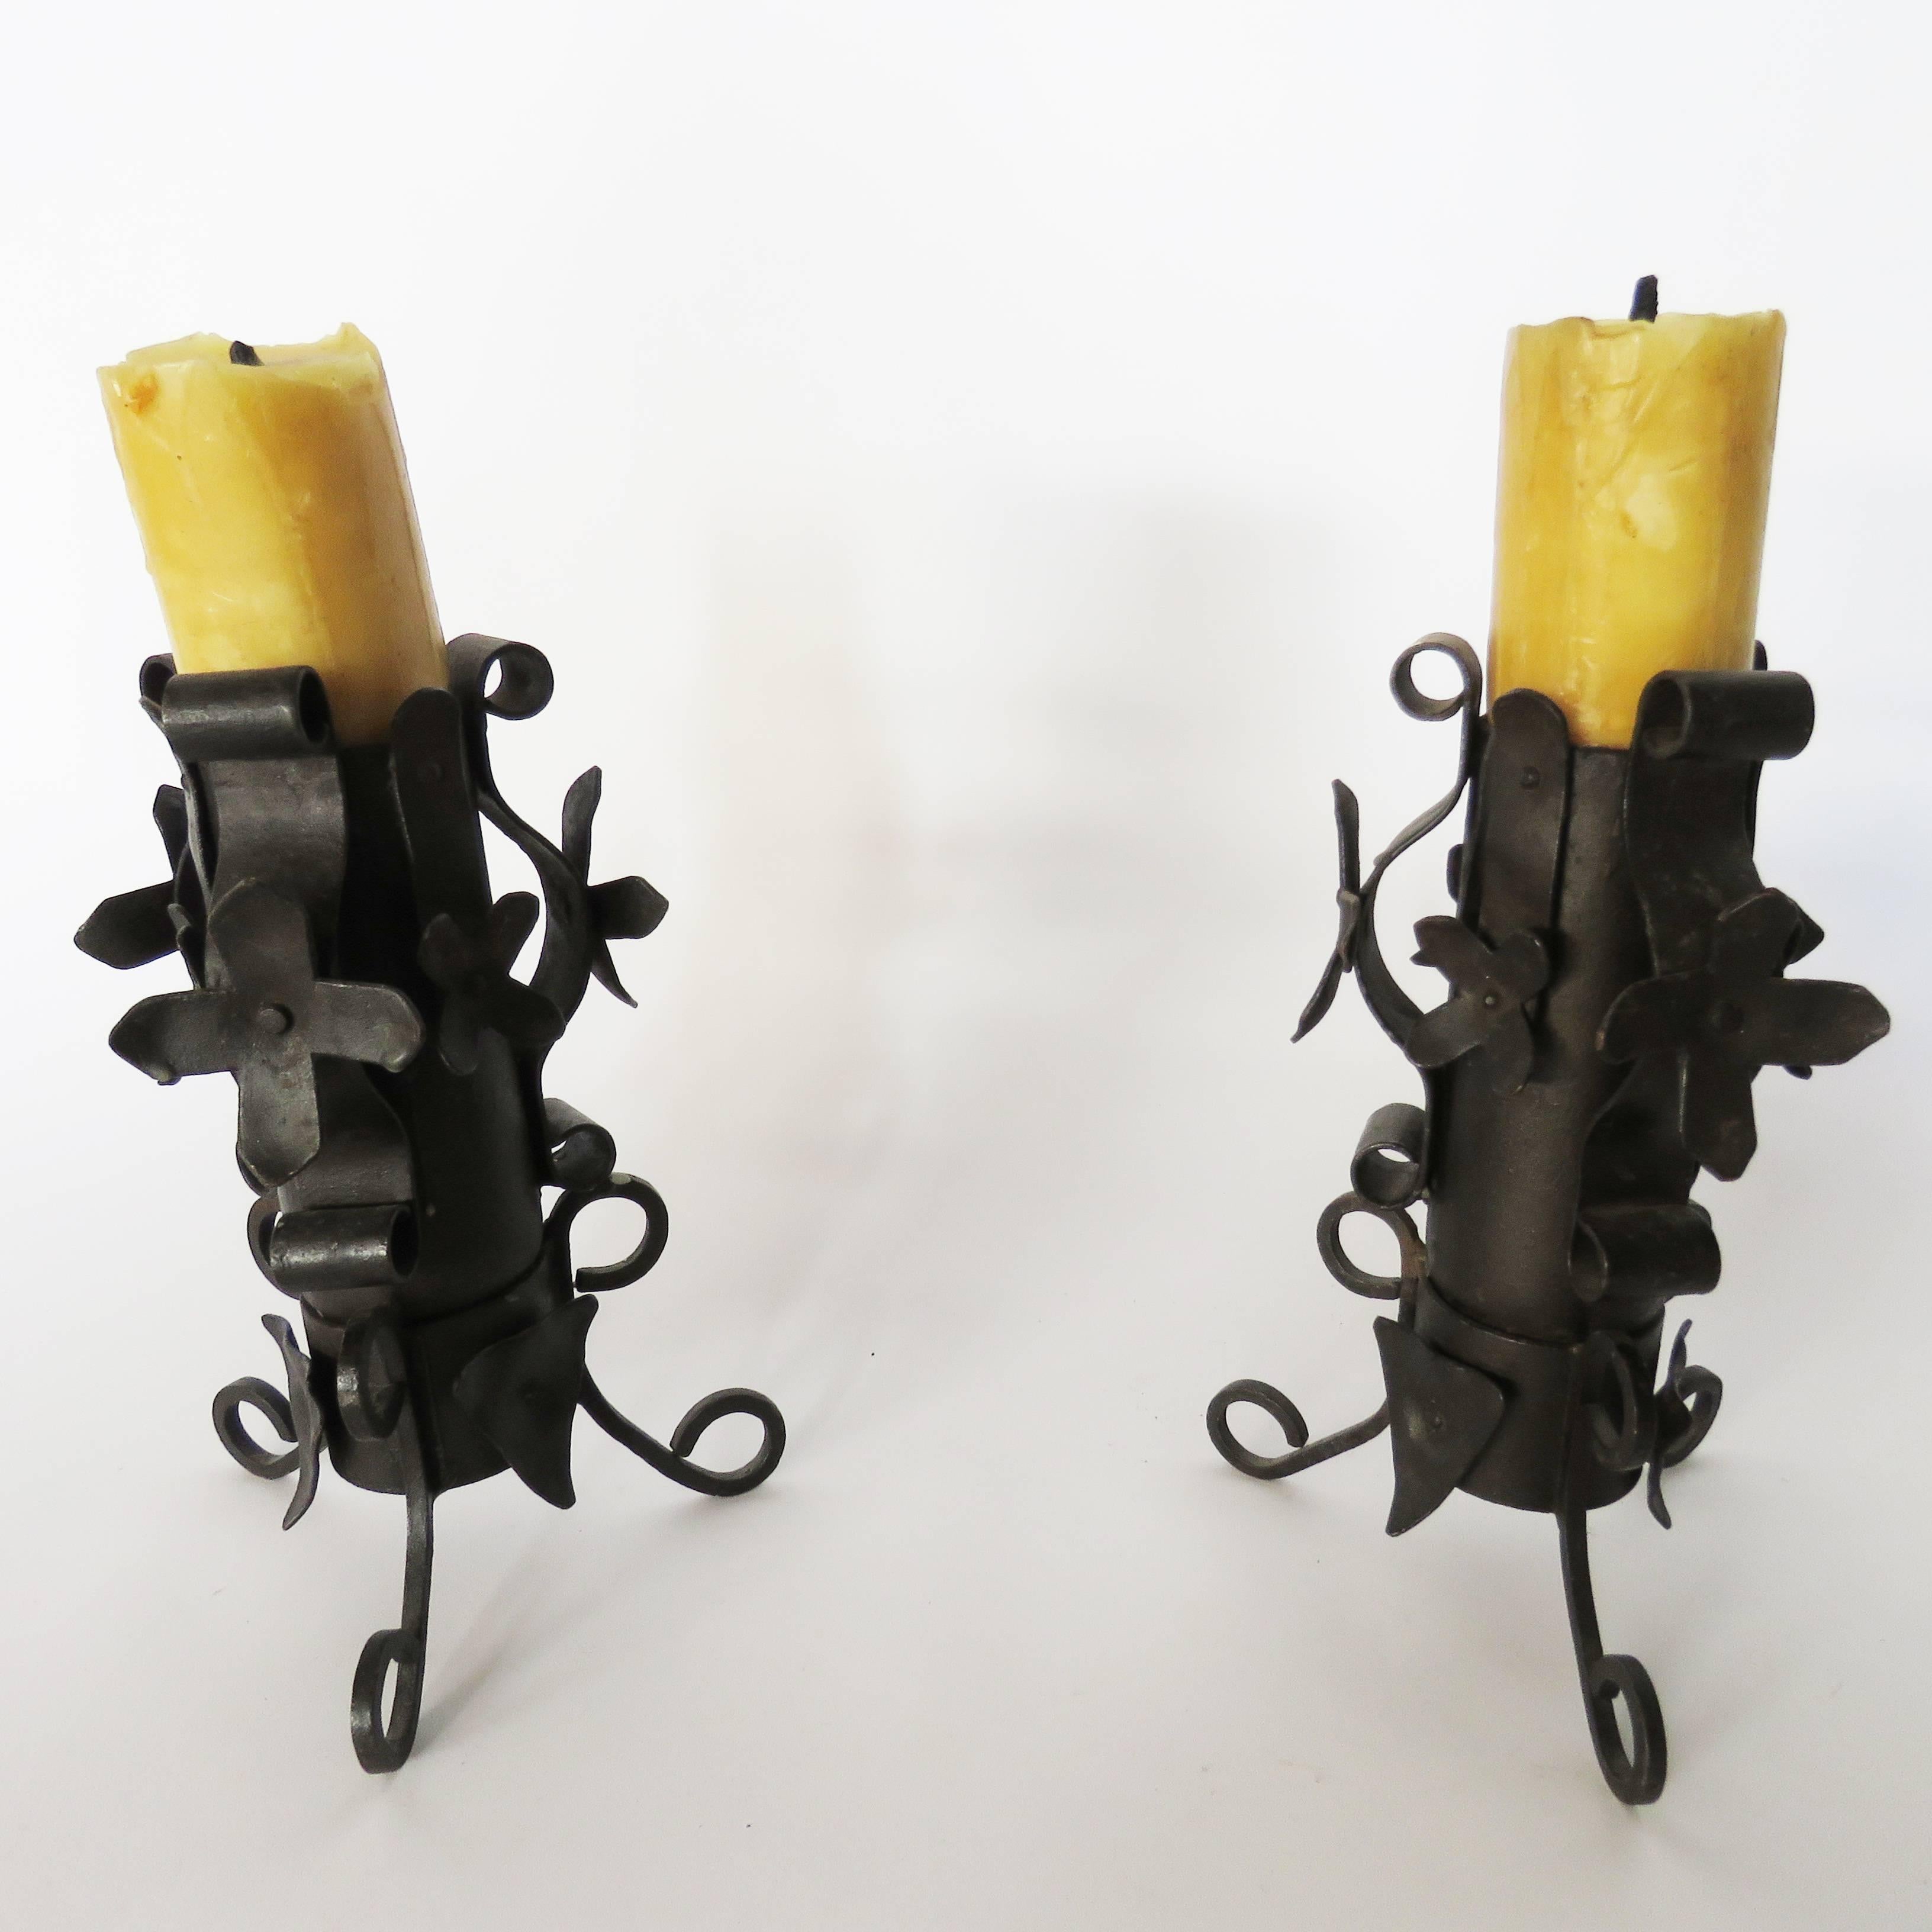 Nicely decorated wrought iron with flower designs and two thick bee wax candles. Original from Barcelona, Spain.

Measures: Height 10.5 inches iron candlestick and 13.5 inches including wax candle.